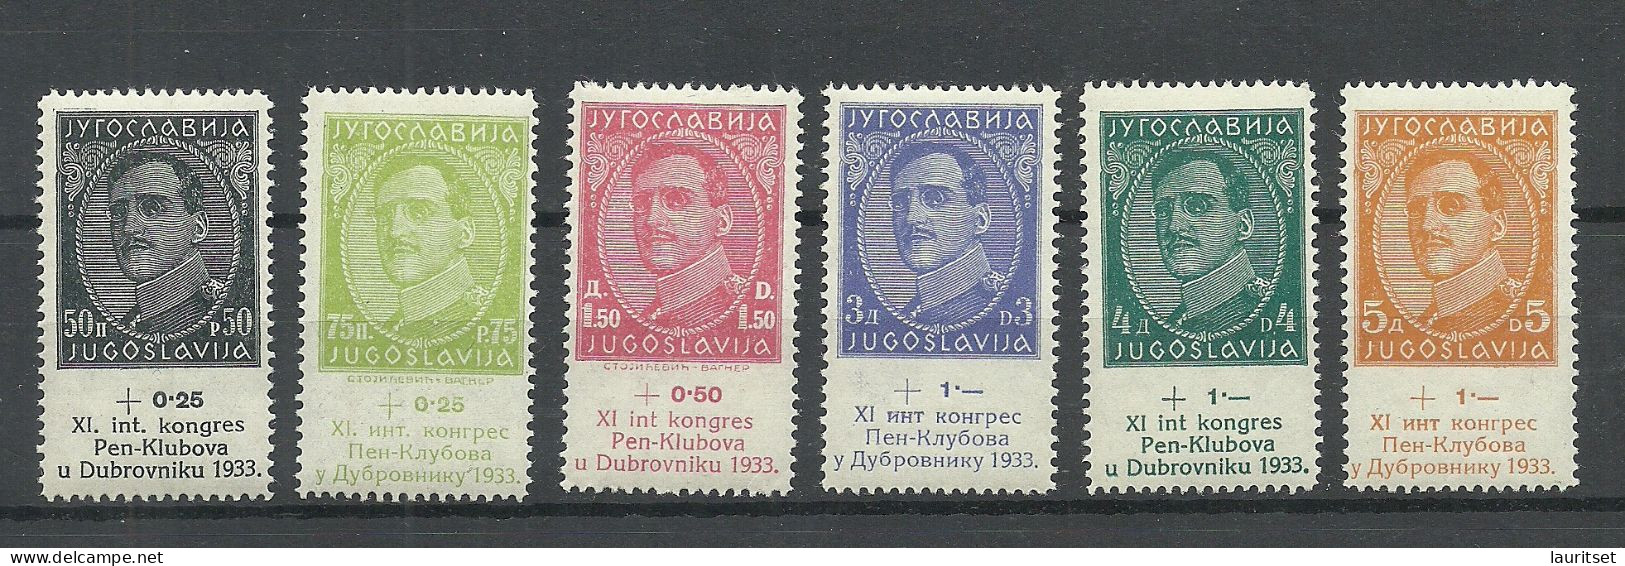 JUGOSLAVIA Jugoslawien 1933 Michel 249 - 254 PEN-Clubs MNH/MH (1,50 & 5 Din. Are MH/*), All Others MNH - Unused Stamps